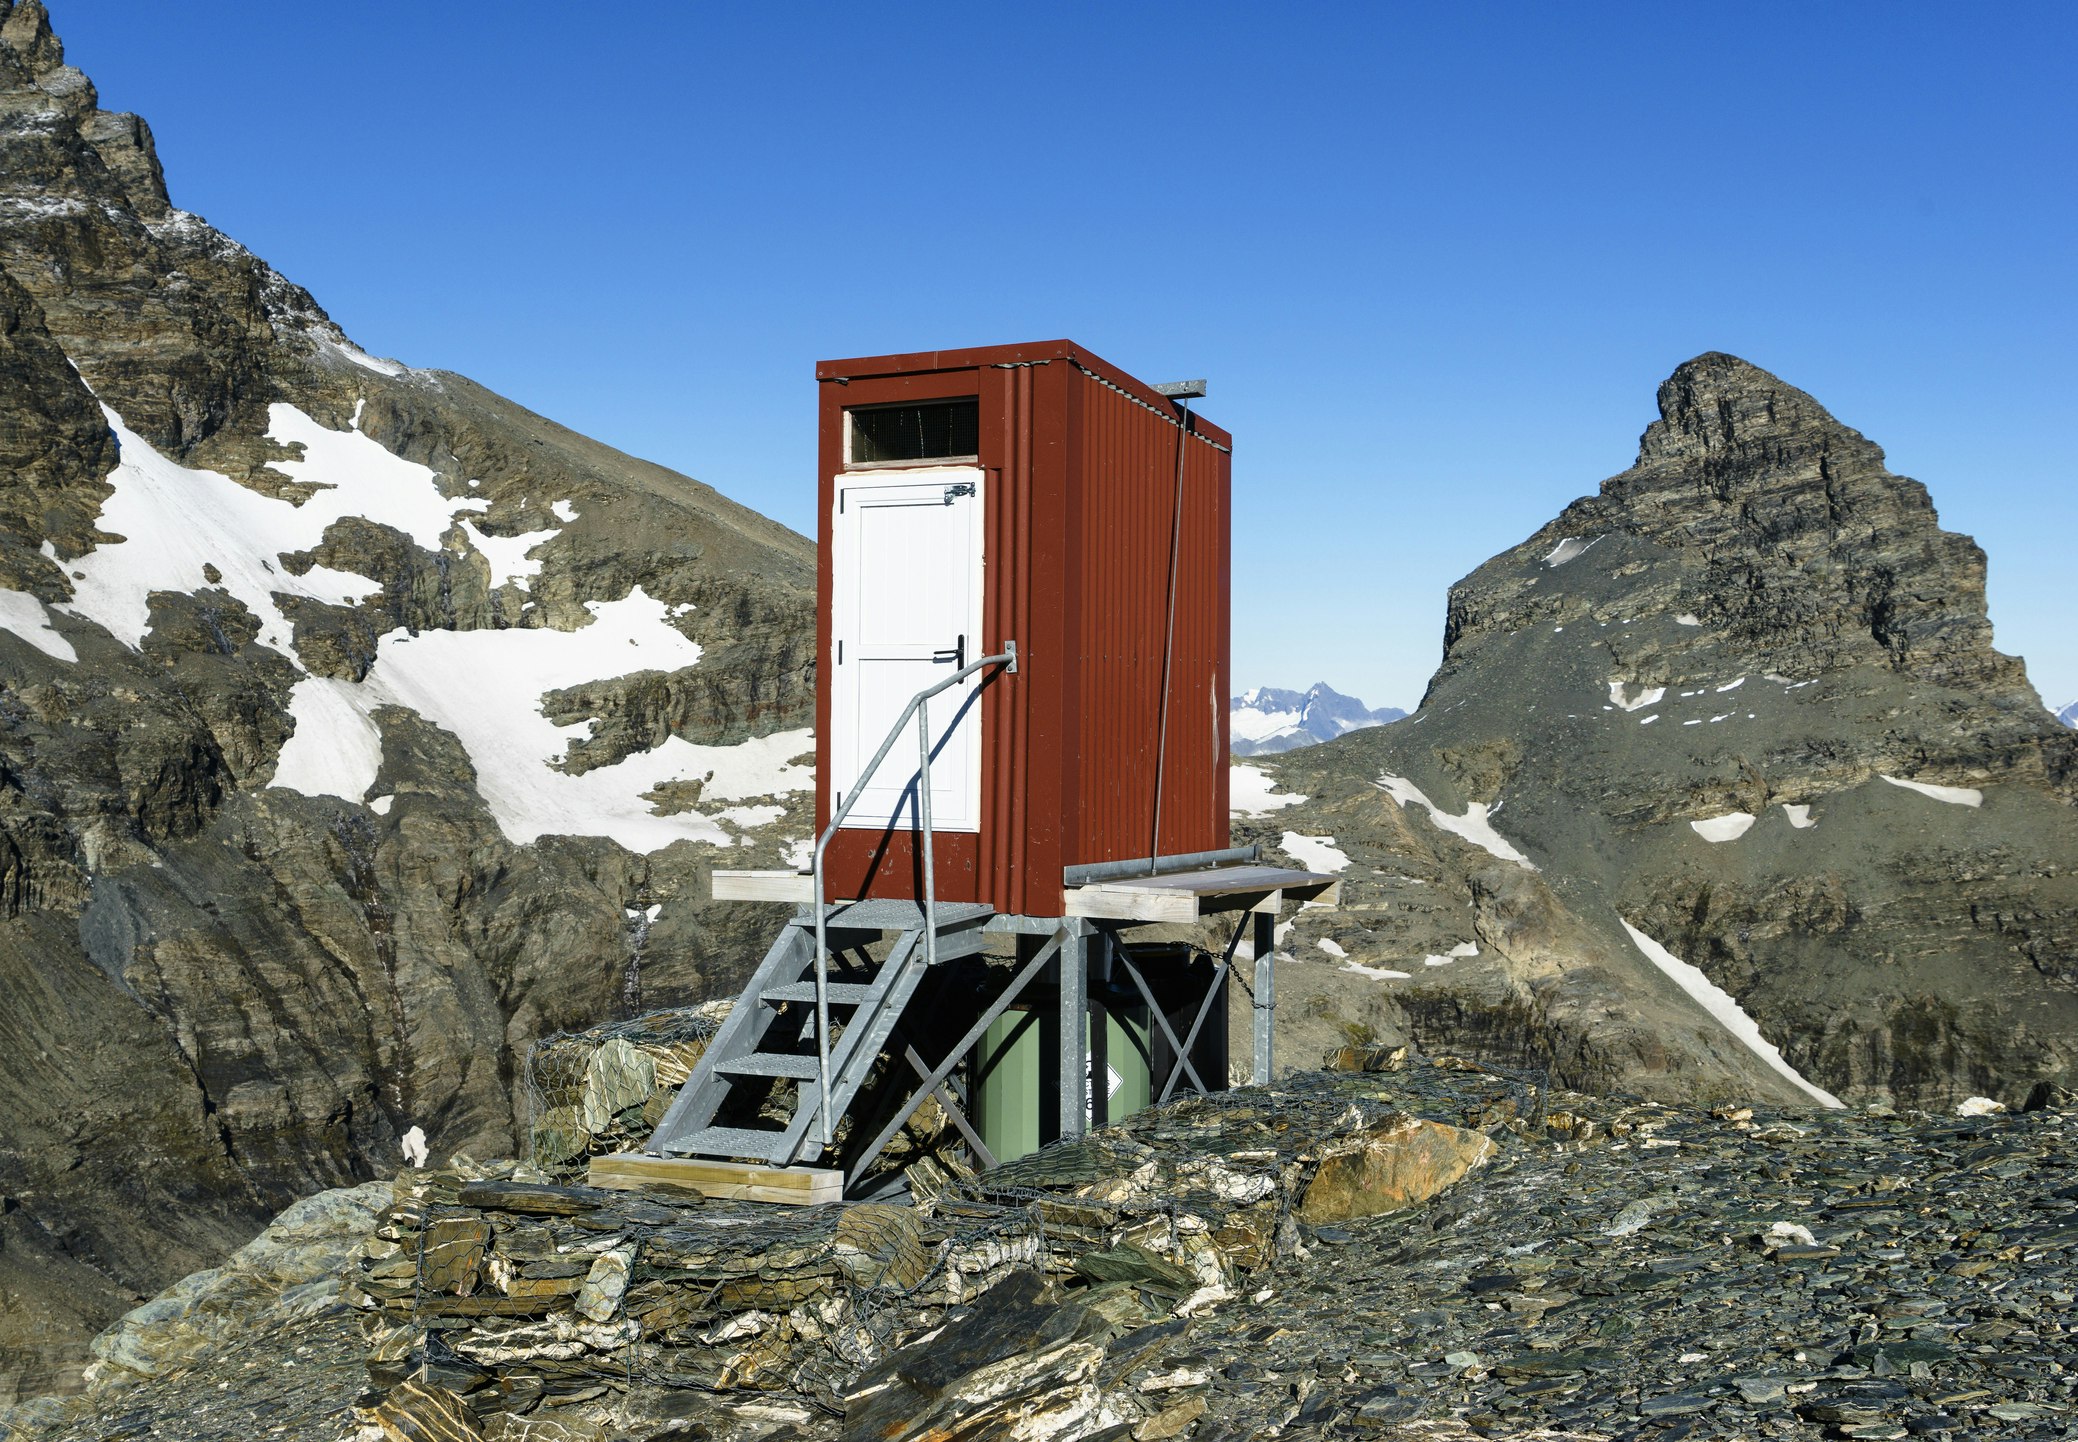 A red corrugated metal shed sits atop a tall, fat green pipe. The front of the toilet shed is bright white, with grey metal steps leading up to it. In stark contrast to the utility of the backcountry bathroom are craggy grey peaks and rock formations, some covered with snow.